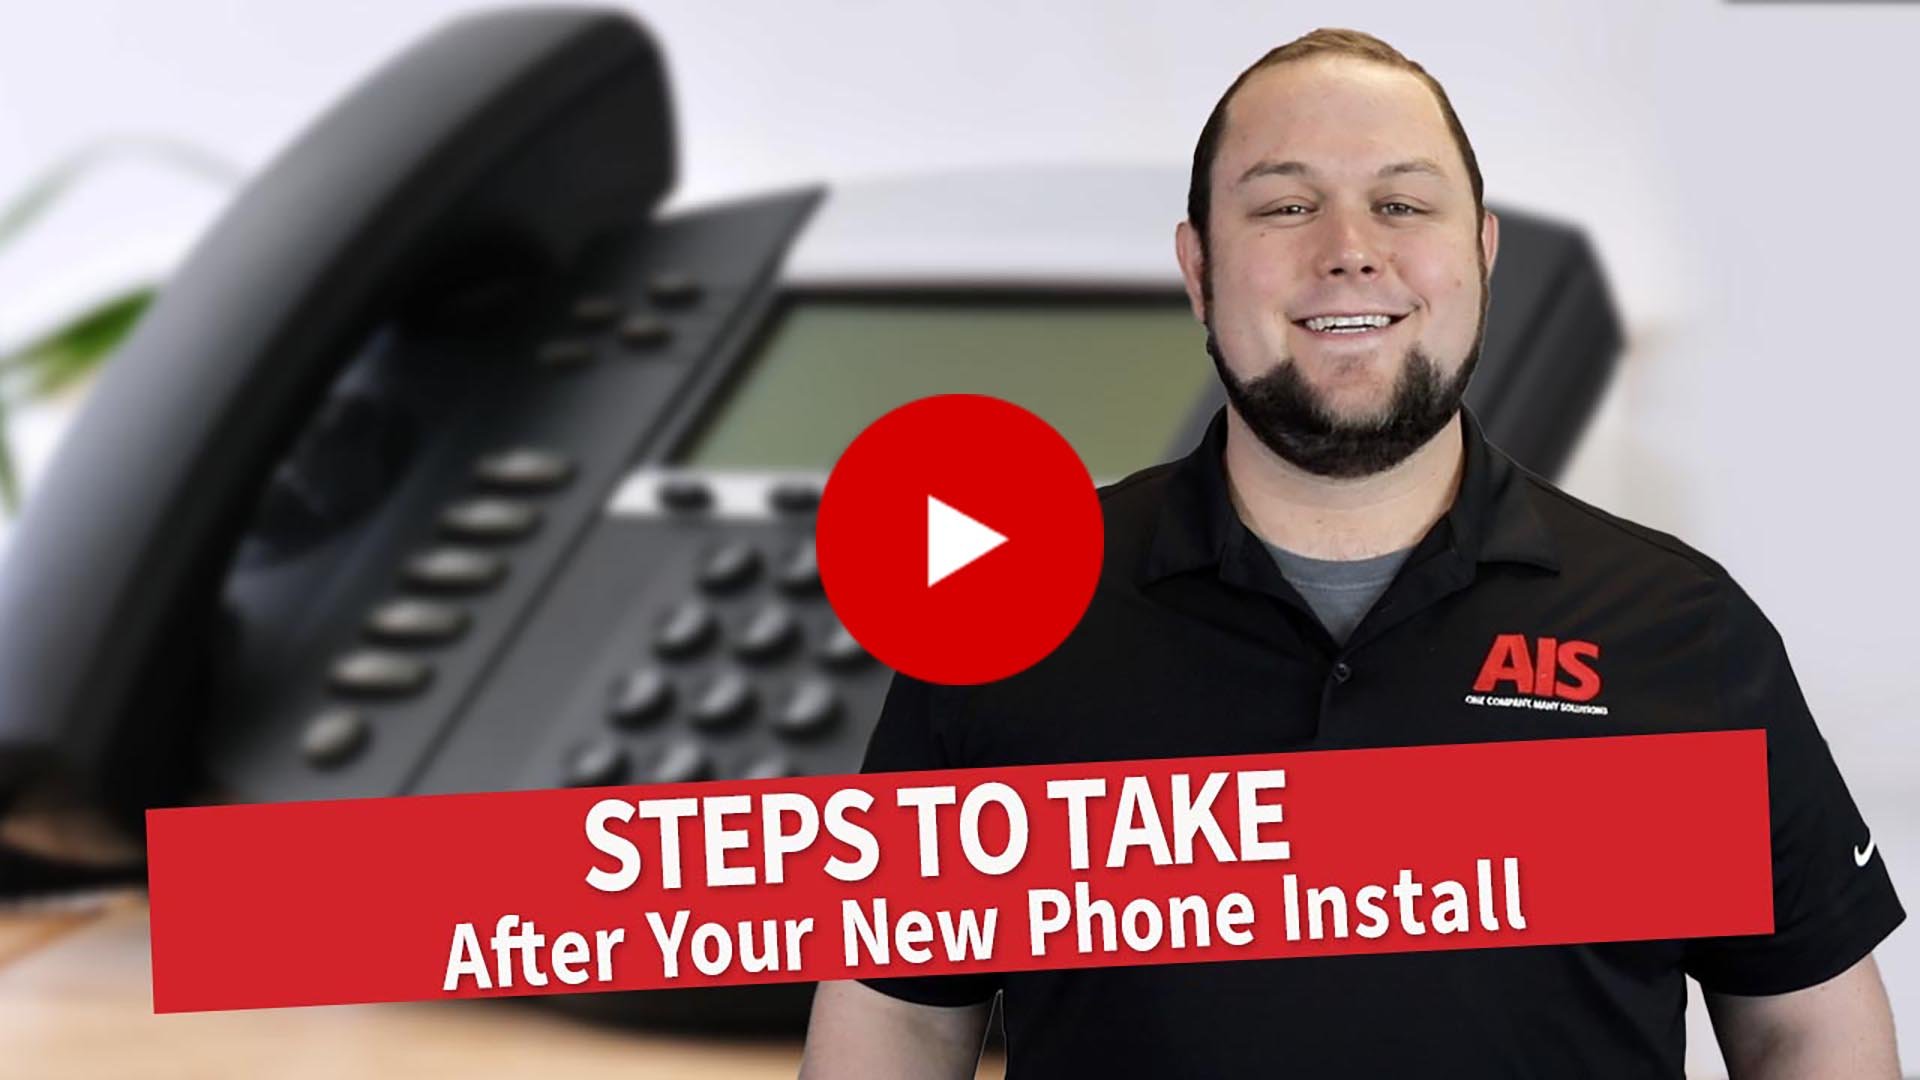 After Your Phone Install - Steps To Take